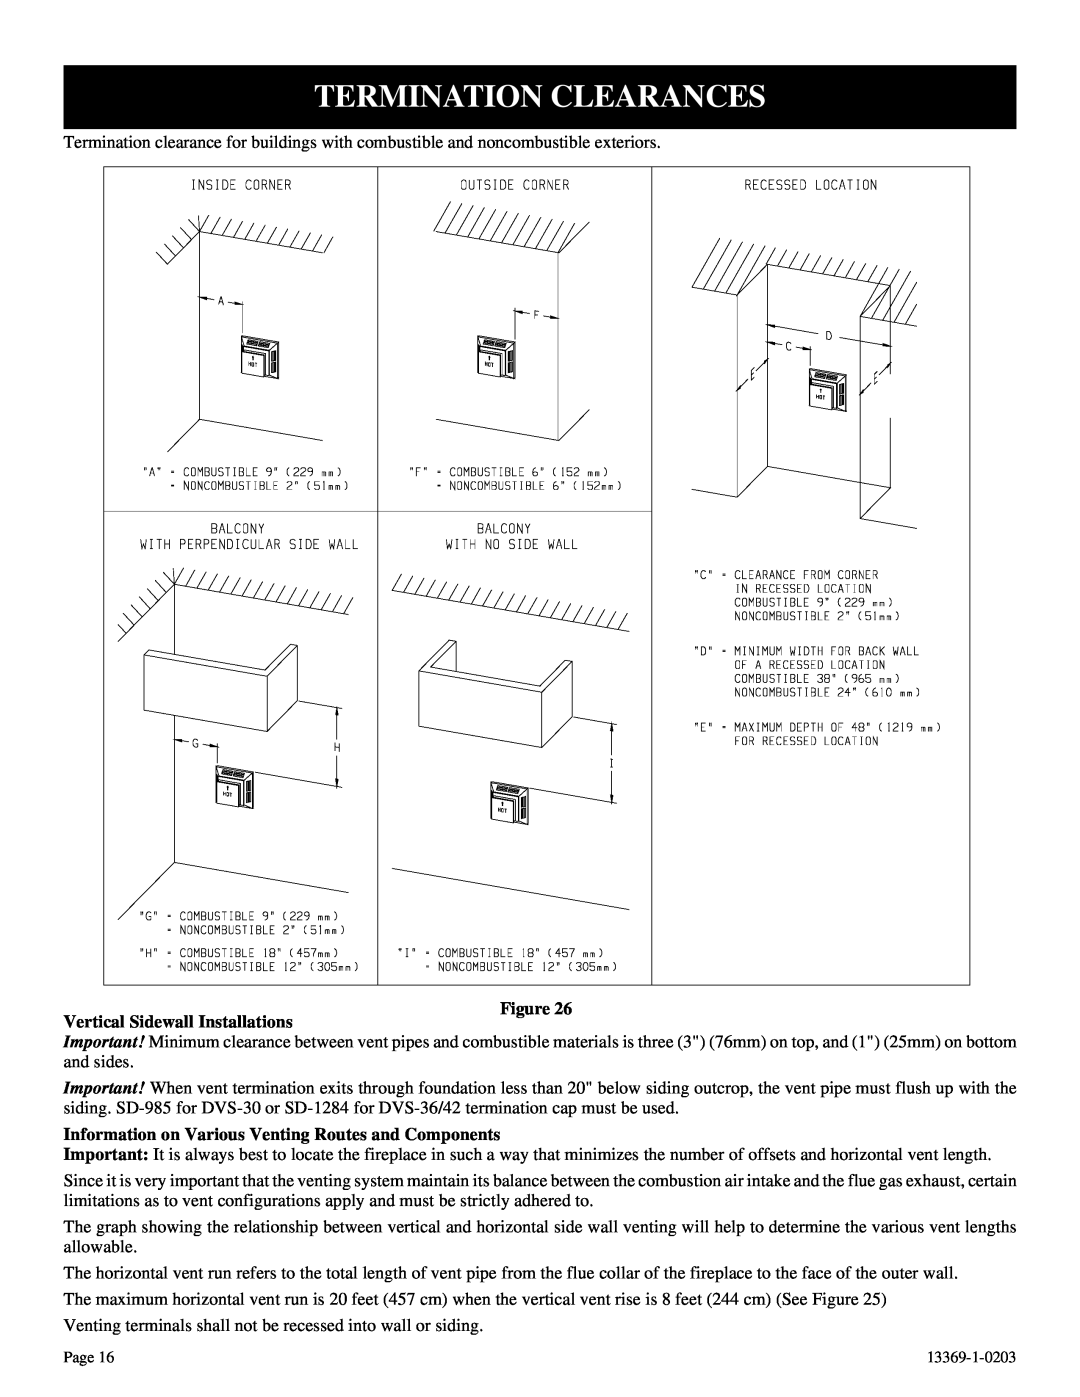 DVS 30-2 installation instructions Termination Clearances, Figure Vertical Sidewall Installations 